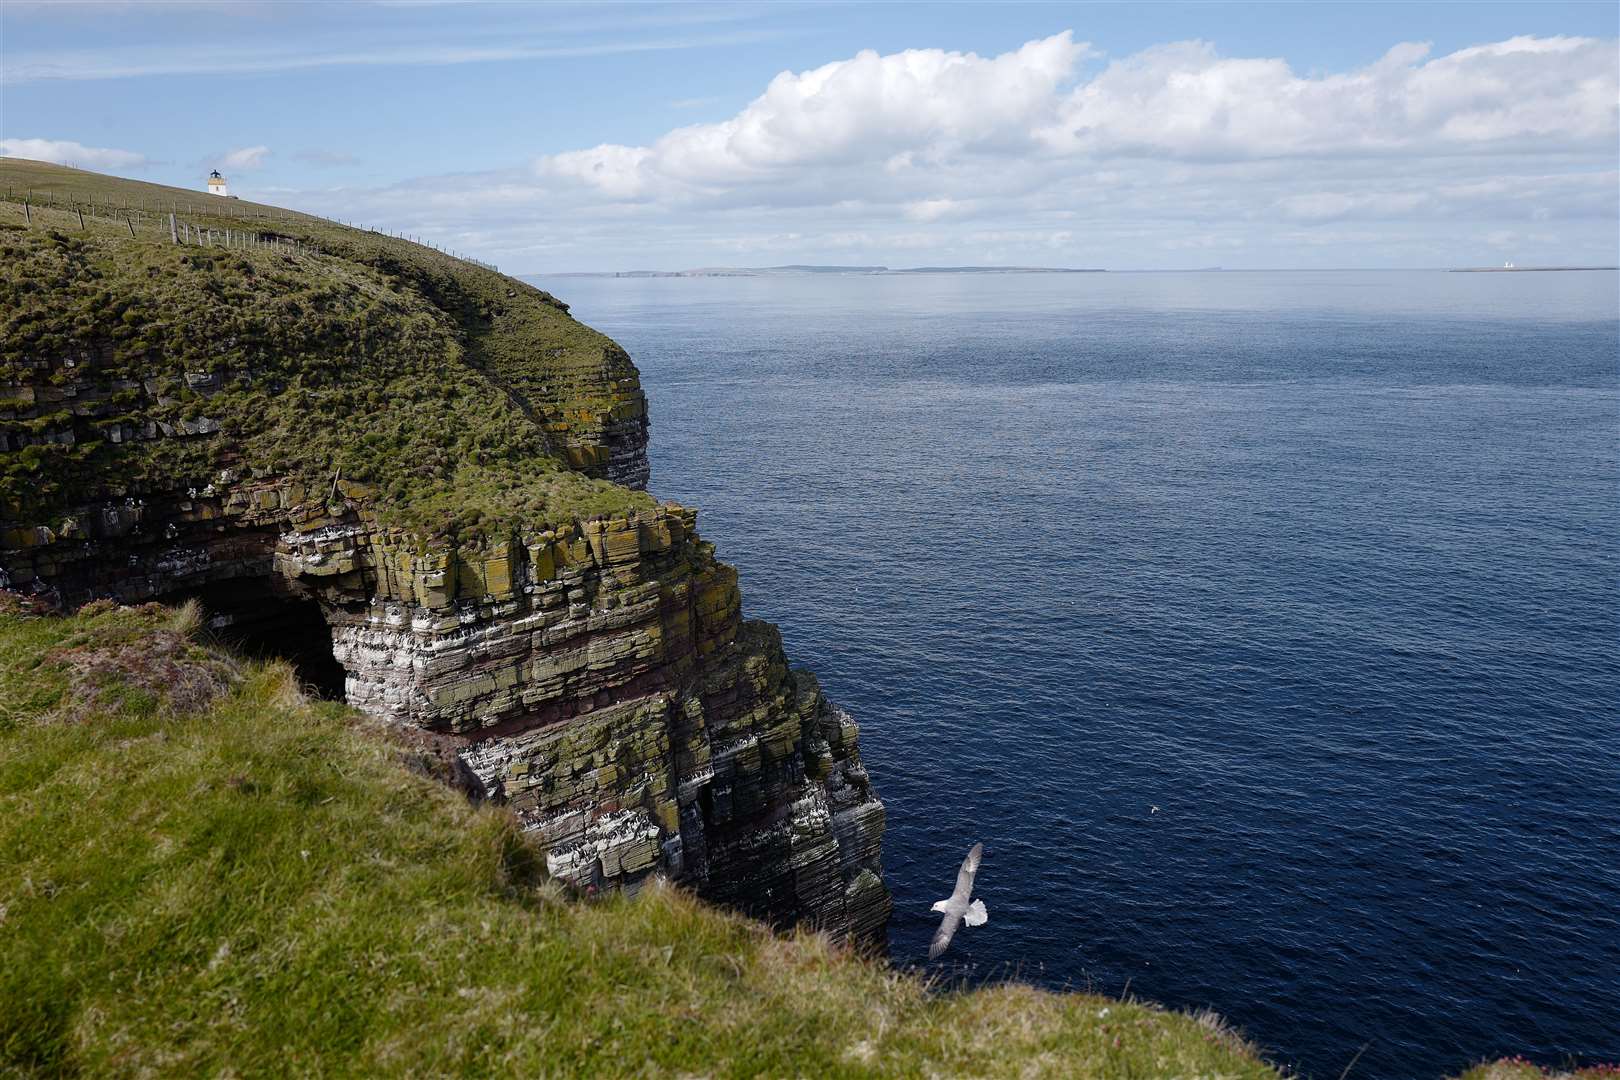 The cliffs of Caithness make it an internationally important site for nesting seabirds.